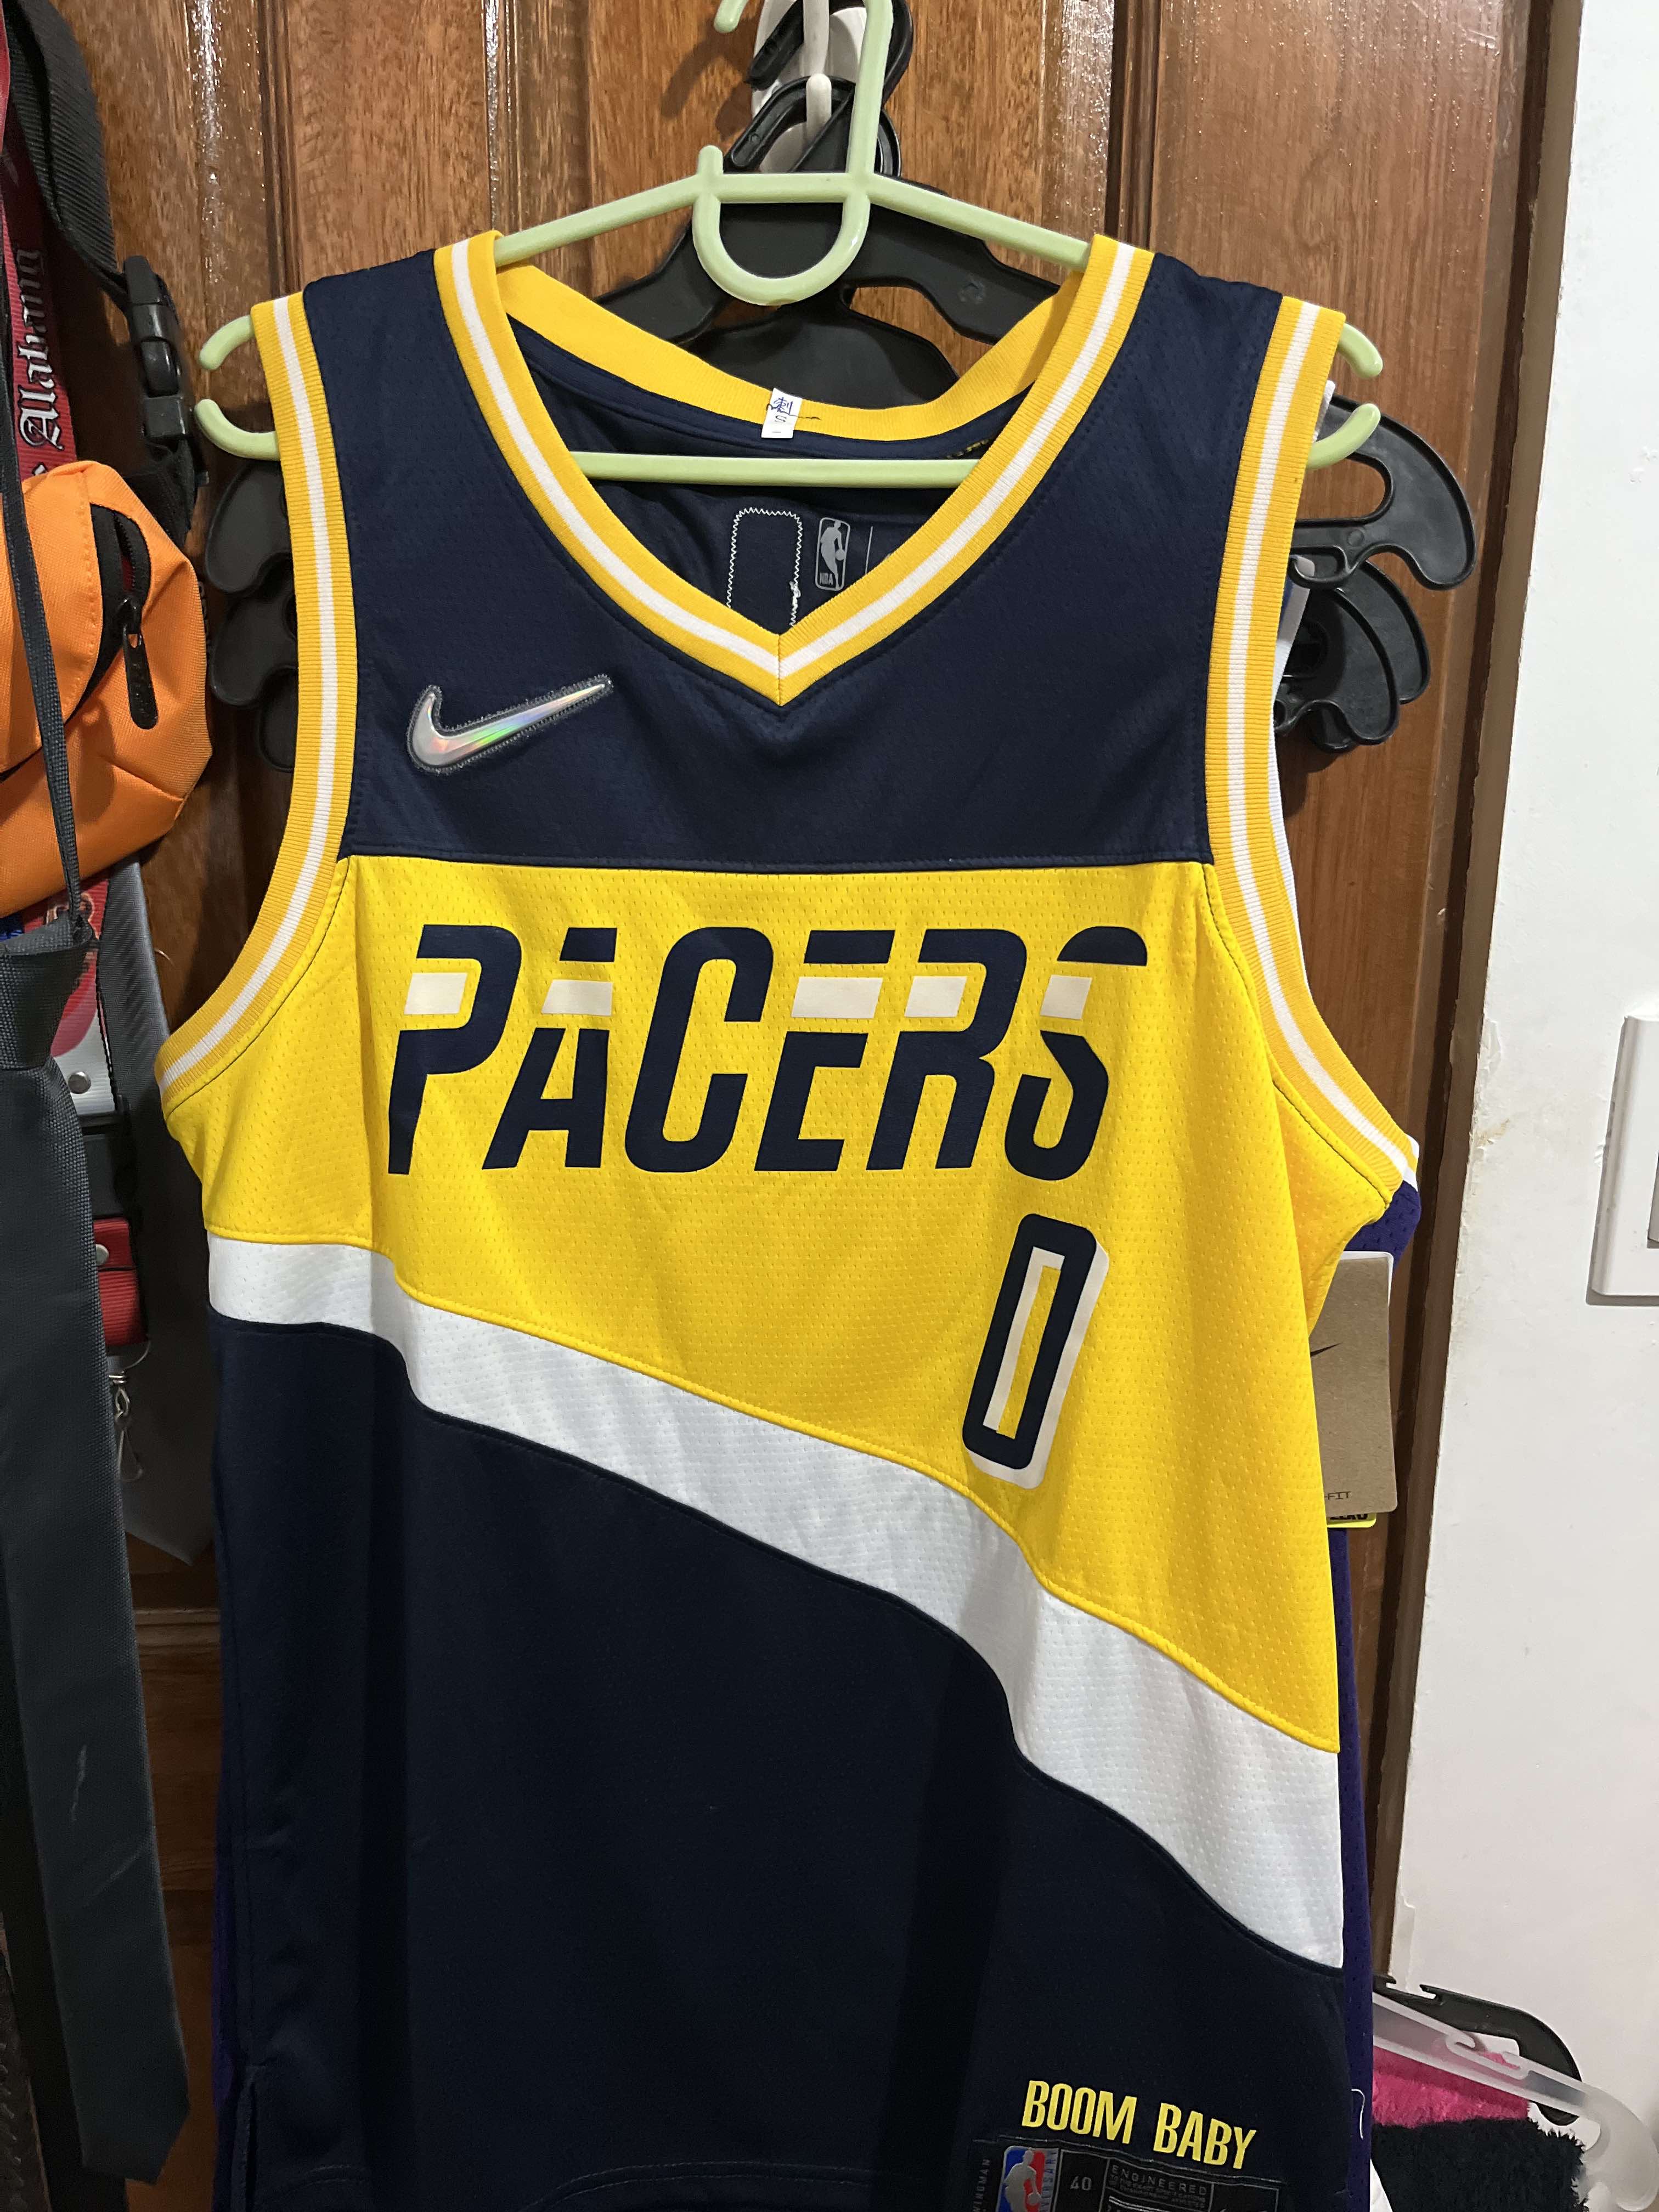 Adult Indiana Pacers #0 Tyrese Haliburton Statement Swingman Jersey by